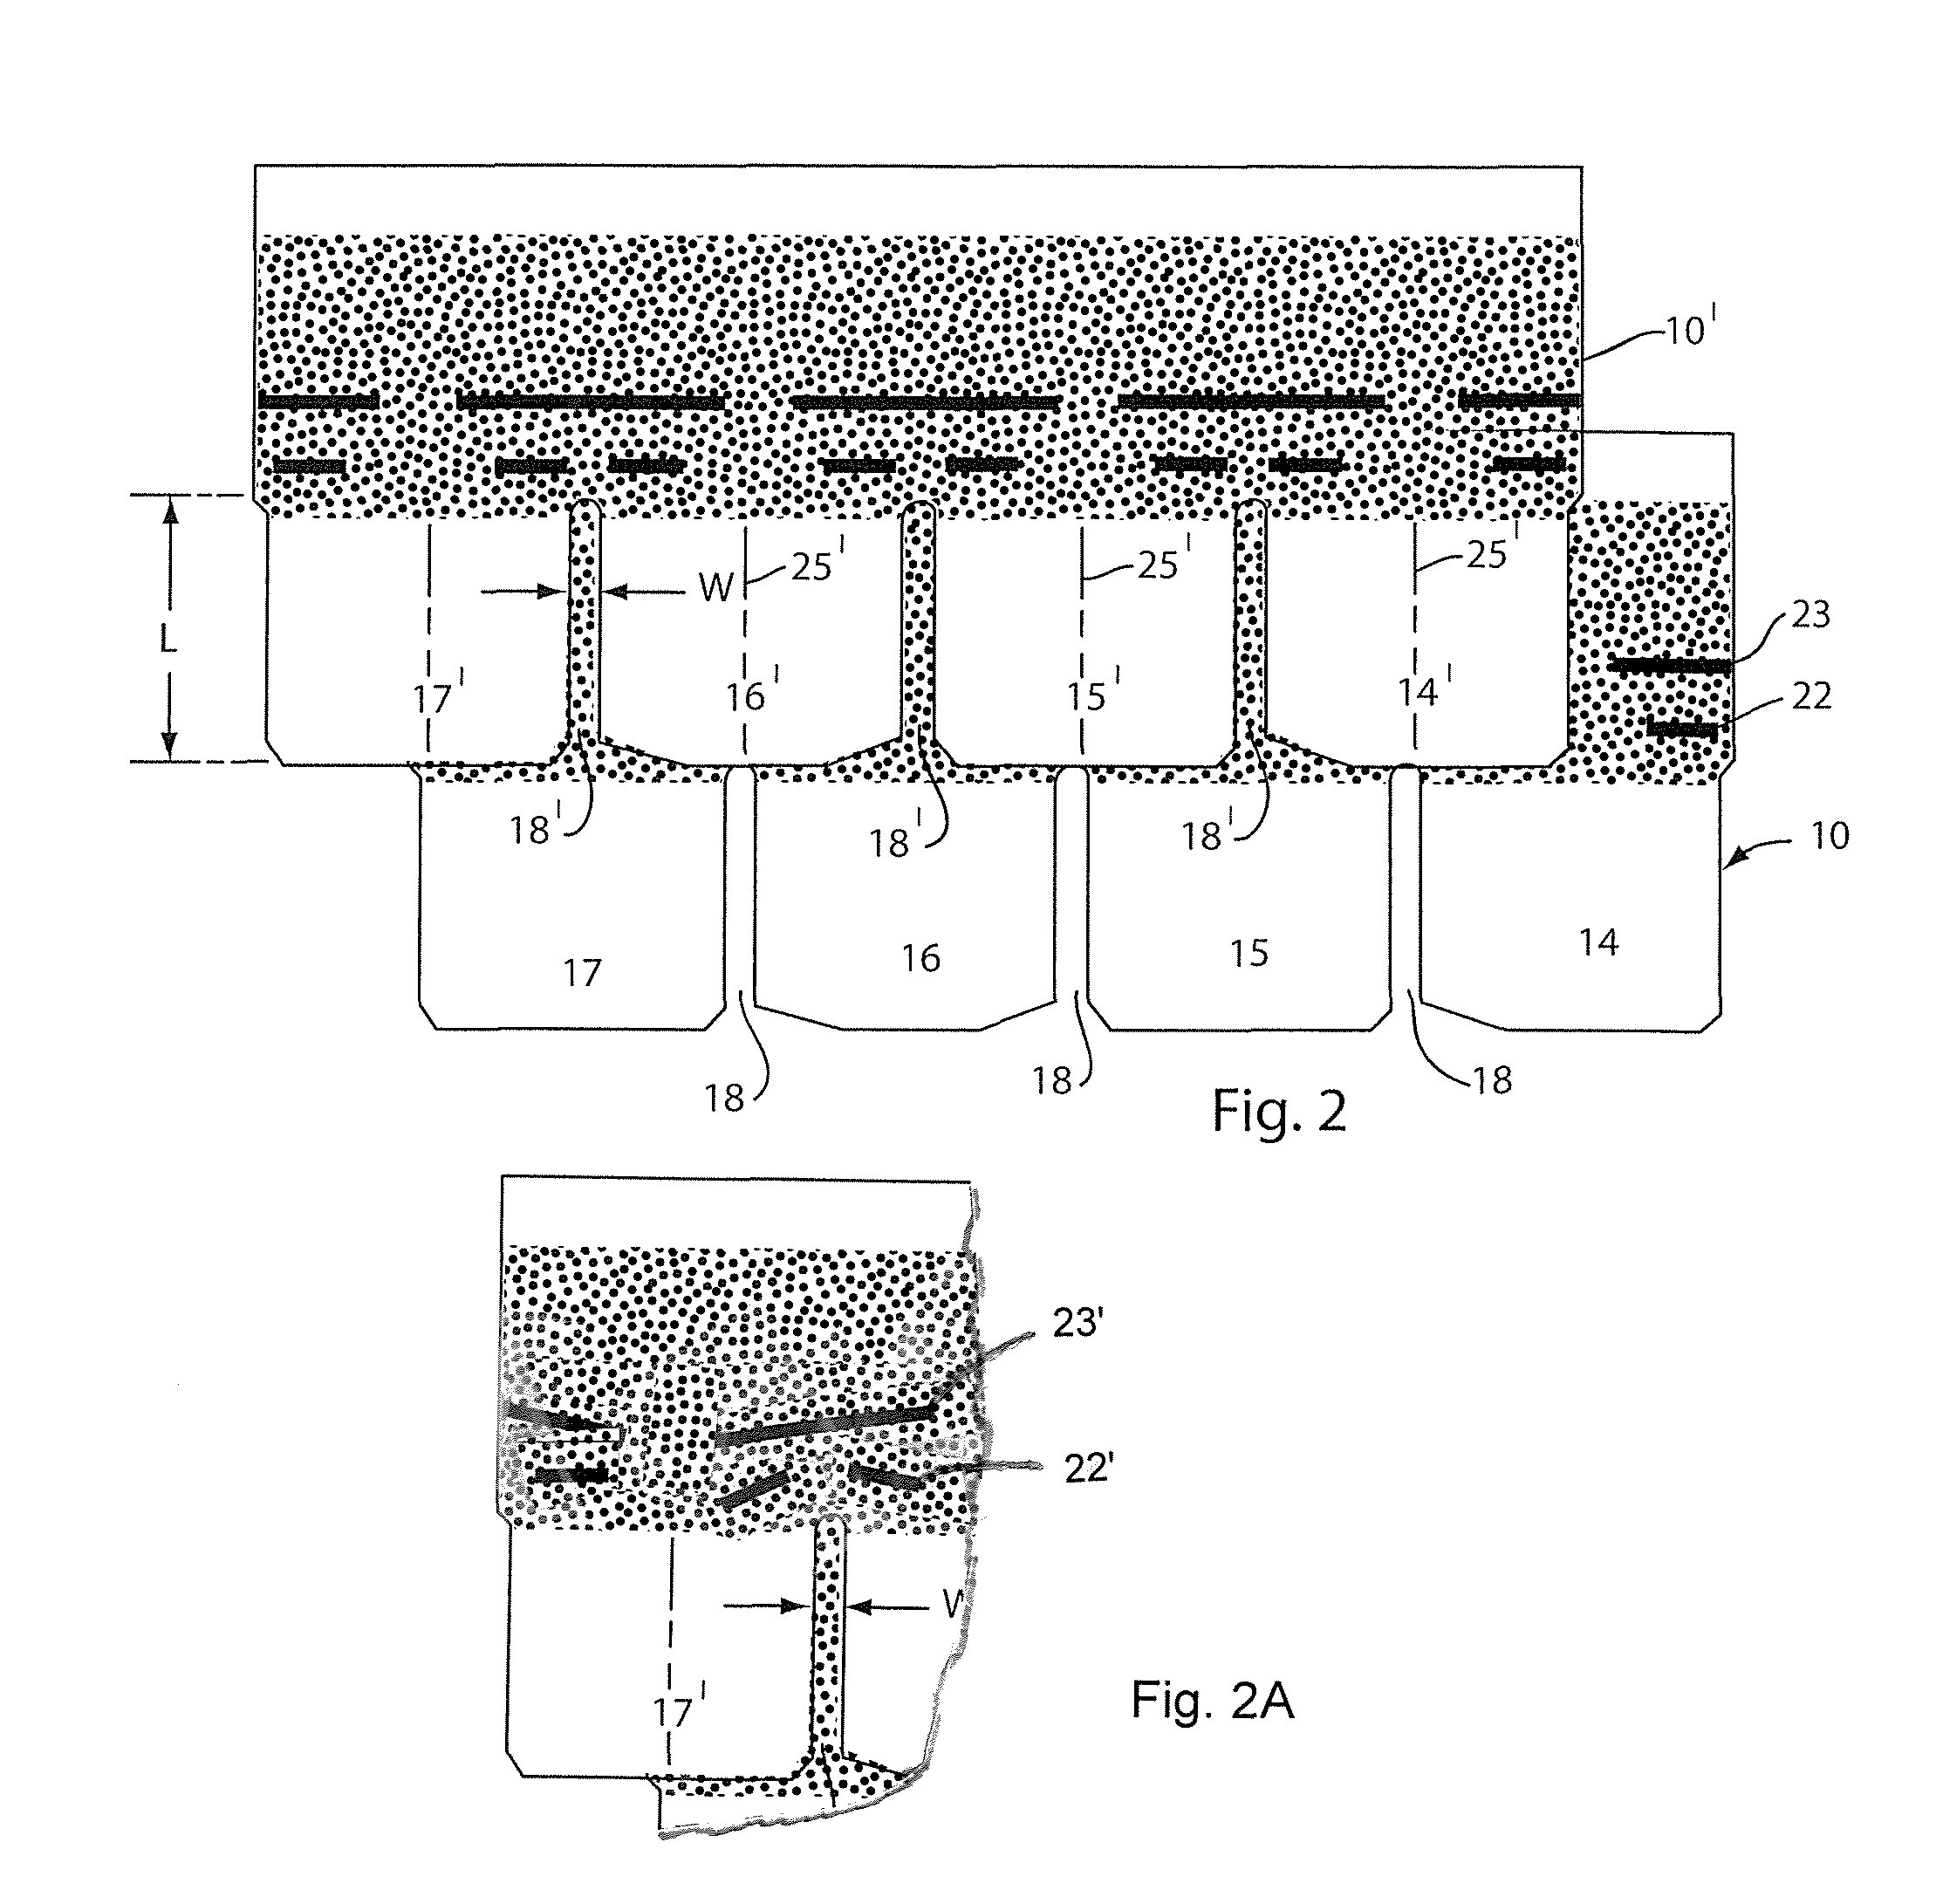 Asphalt shingle, roof covering therewith and method of making the same with synchronized adhesive positioning thereon